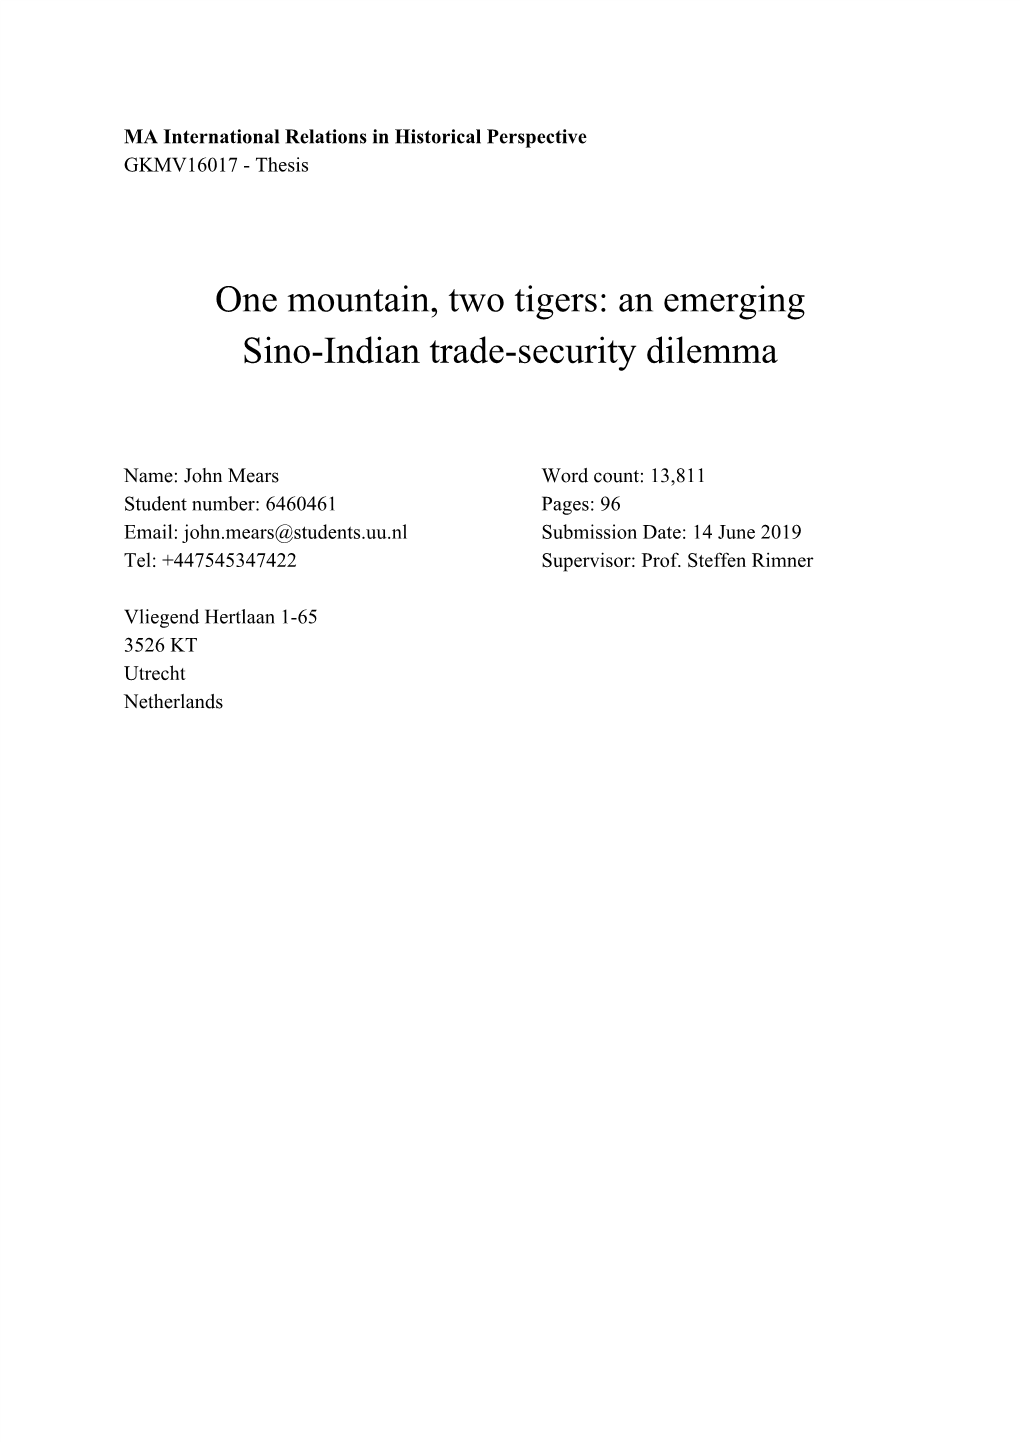 One Mountain, Two Tigers: an Emerging Sino-Indian Trade-Security